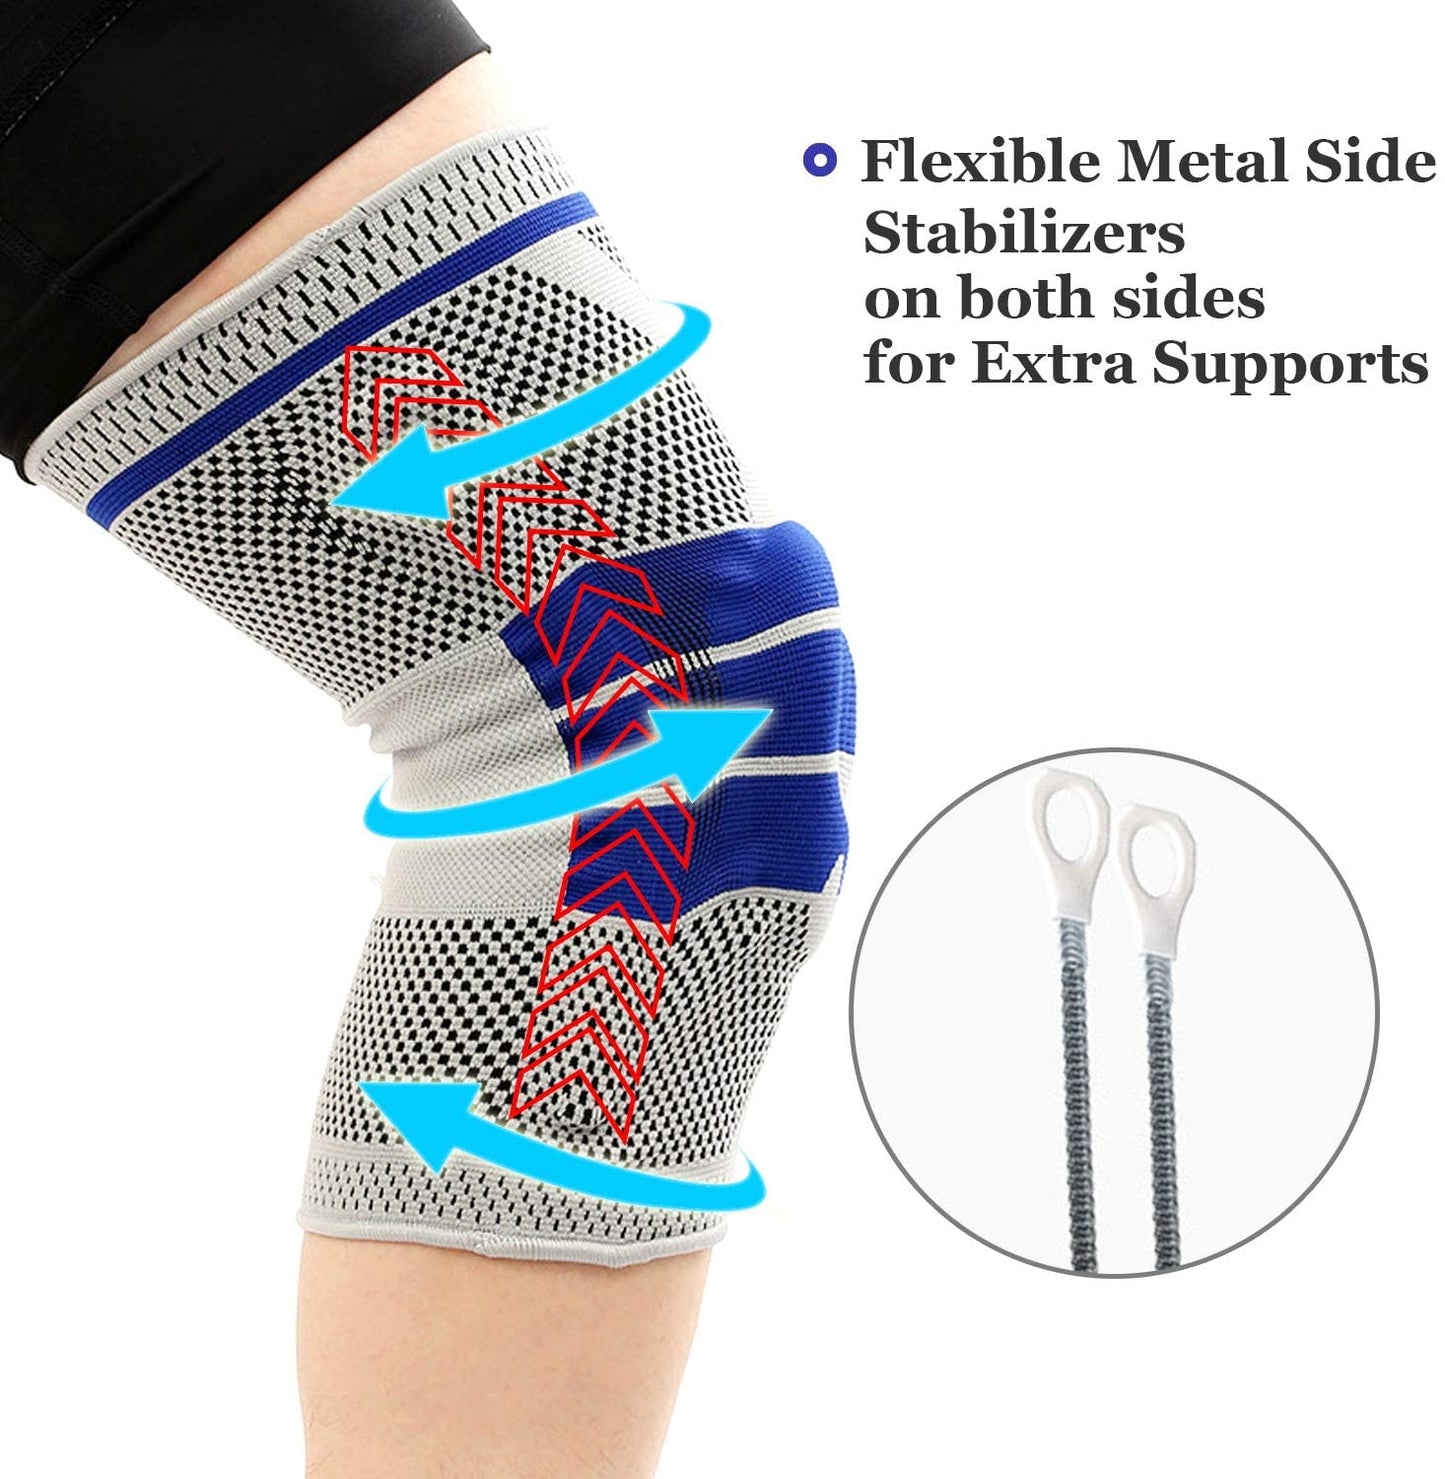 Copper Knee Braces for Knee Pain 2 Pack, Knee Compression Sleeve Support  for Men and Women, Medical Grade Knee Pads for Running, Hiking, Working